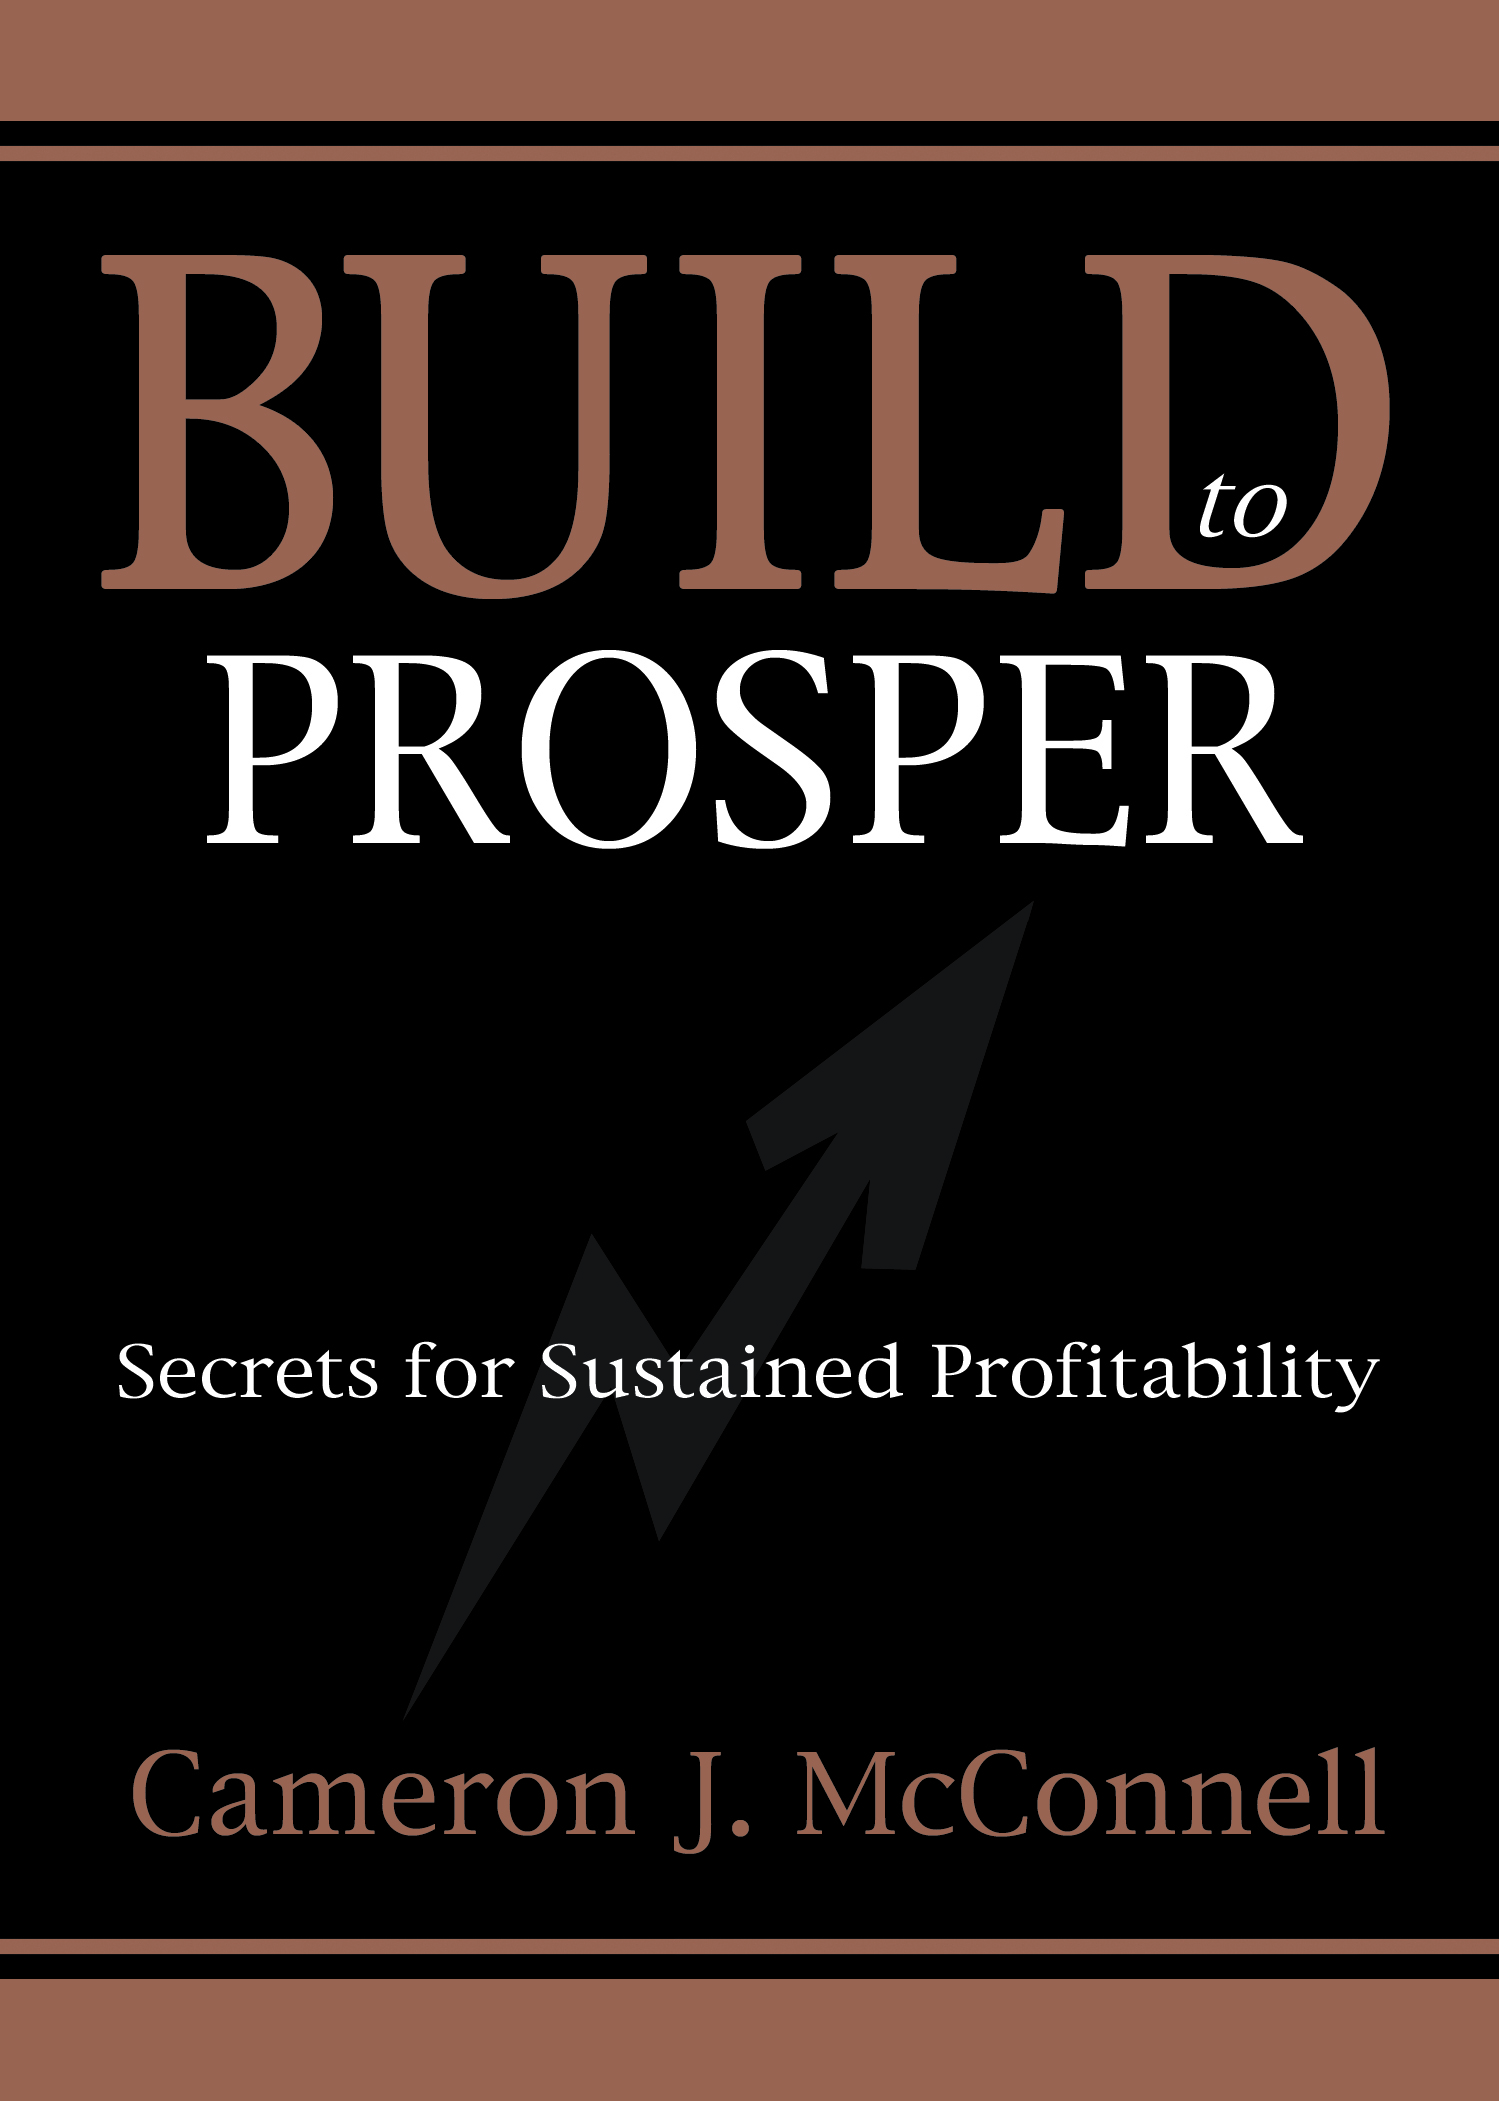 "Build to Prosper: Secrets for Sustained Profitability" by Cameron J. McConnell